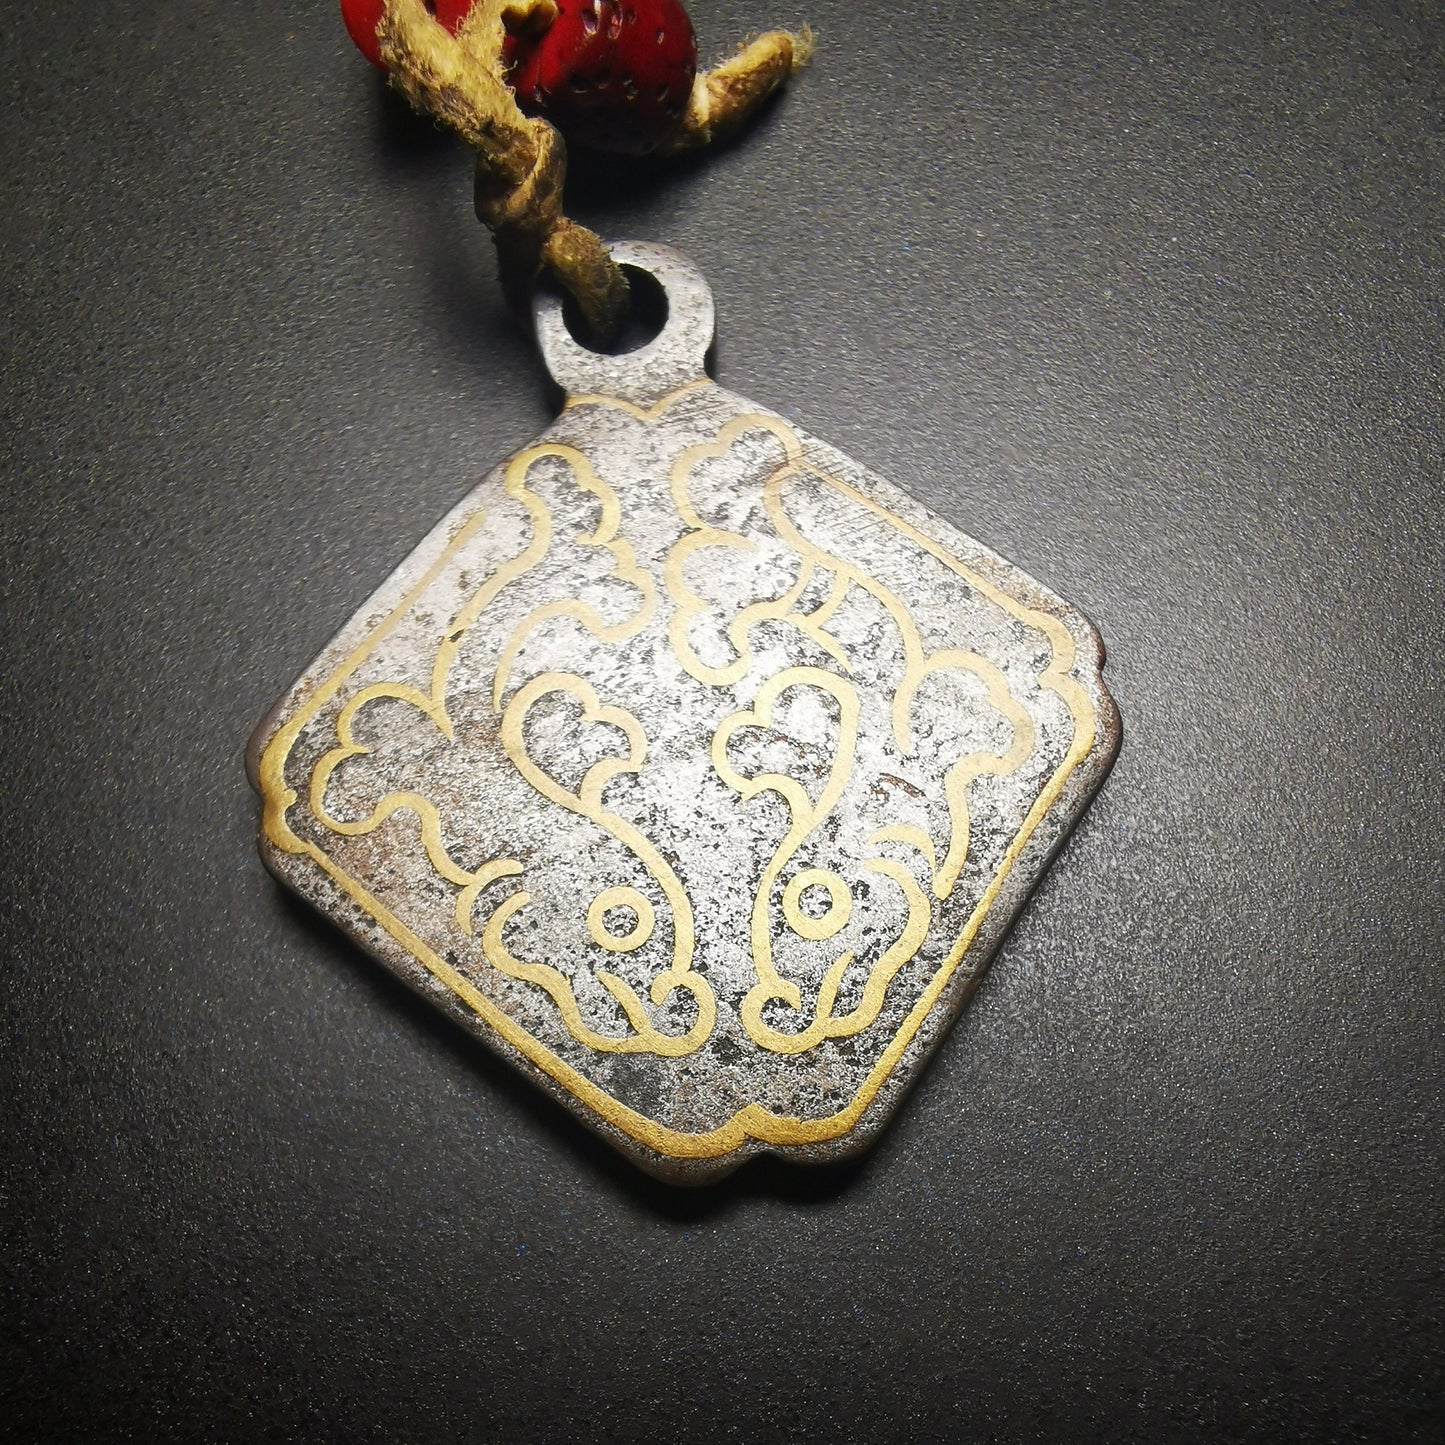 Gandhanra Handmade Tibetan Buddhist Amulet,Pair of Golden Fish Badge, Made of Cold Iron,inlaid with Copper Wire